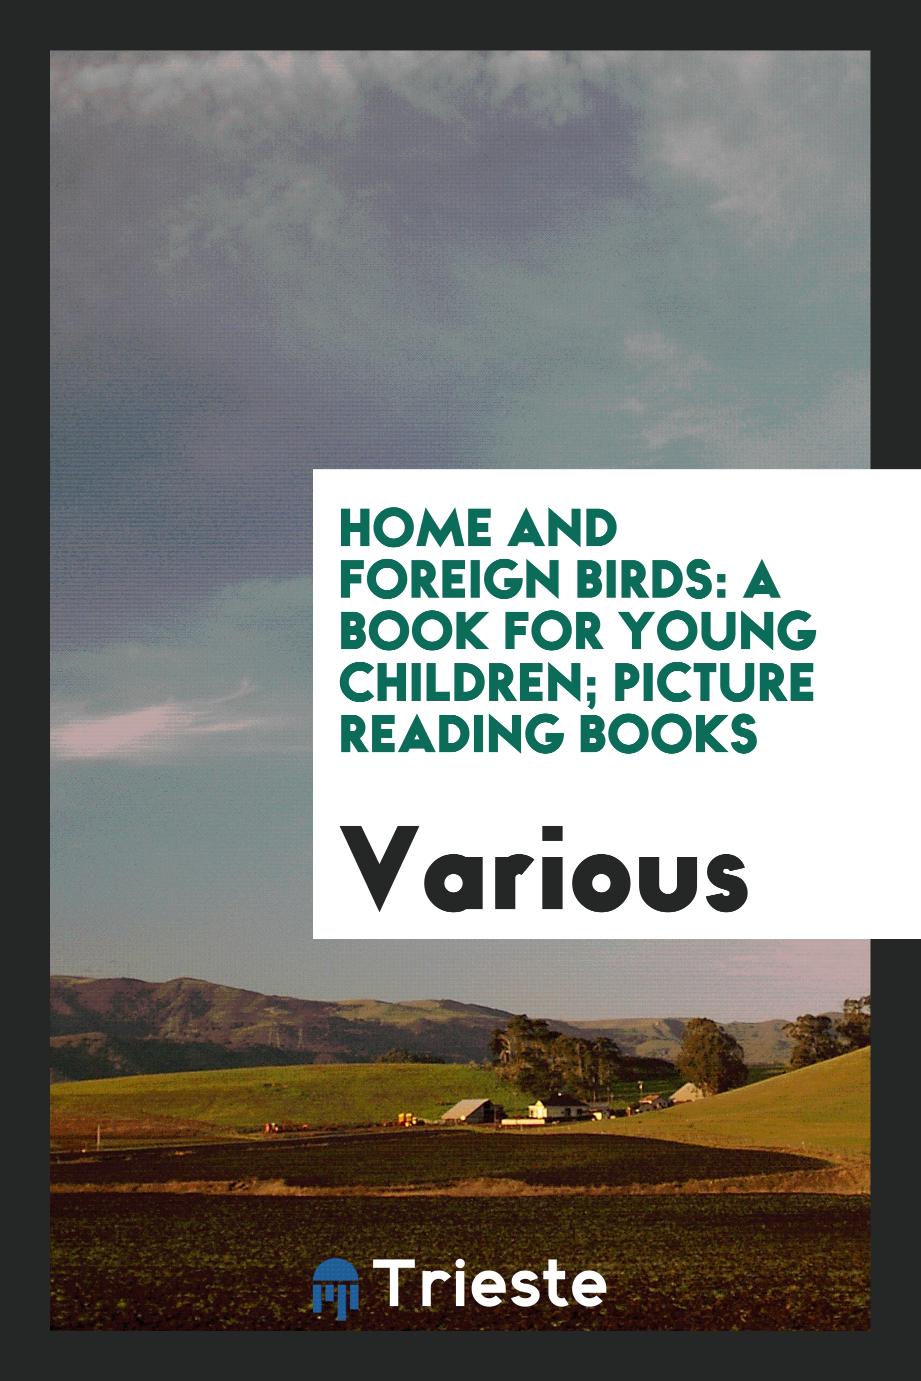 Home and Foreign Birds: A Book for Young Children; Picture reading books